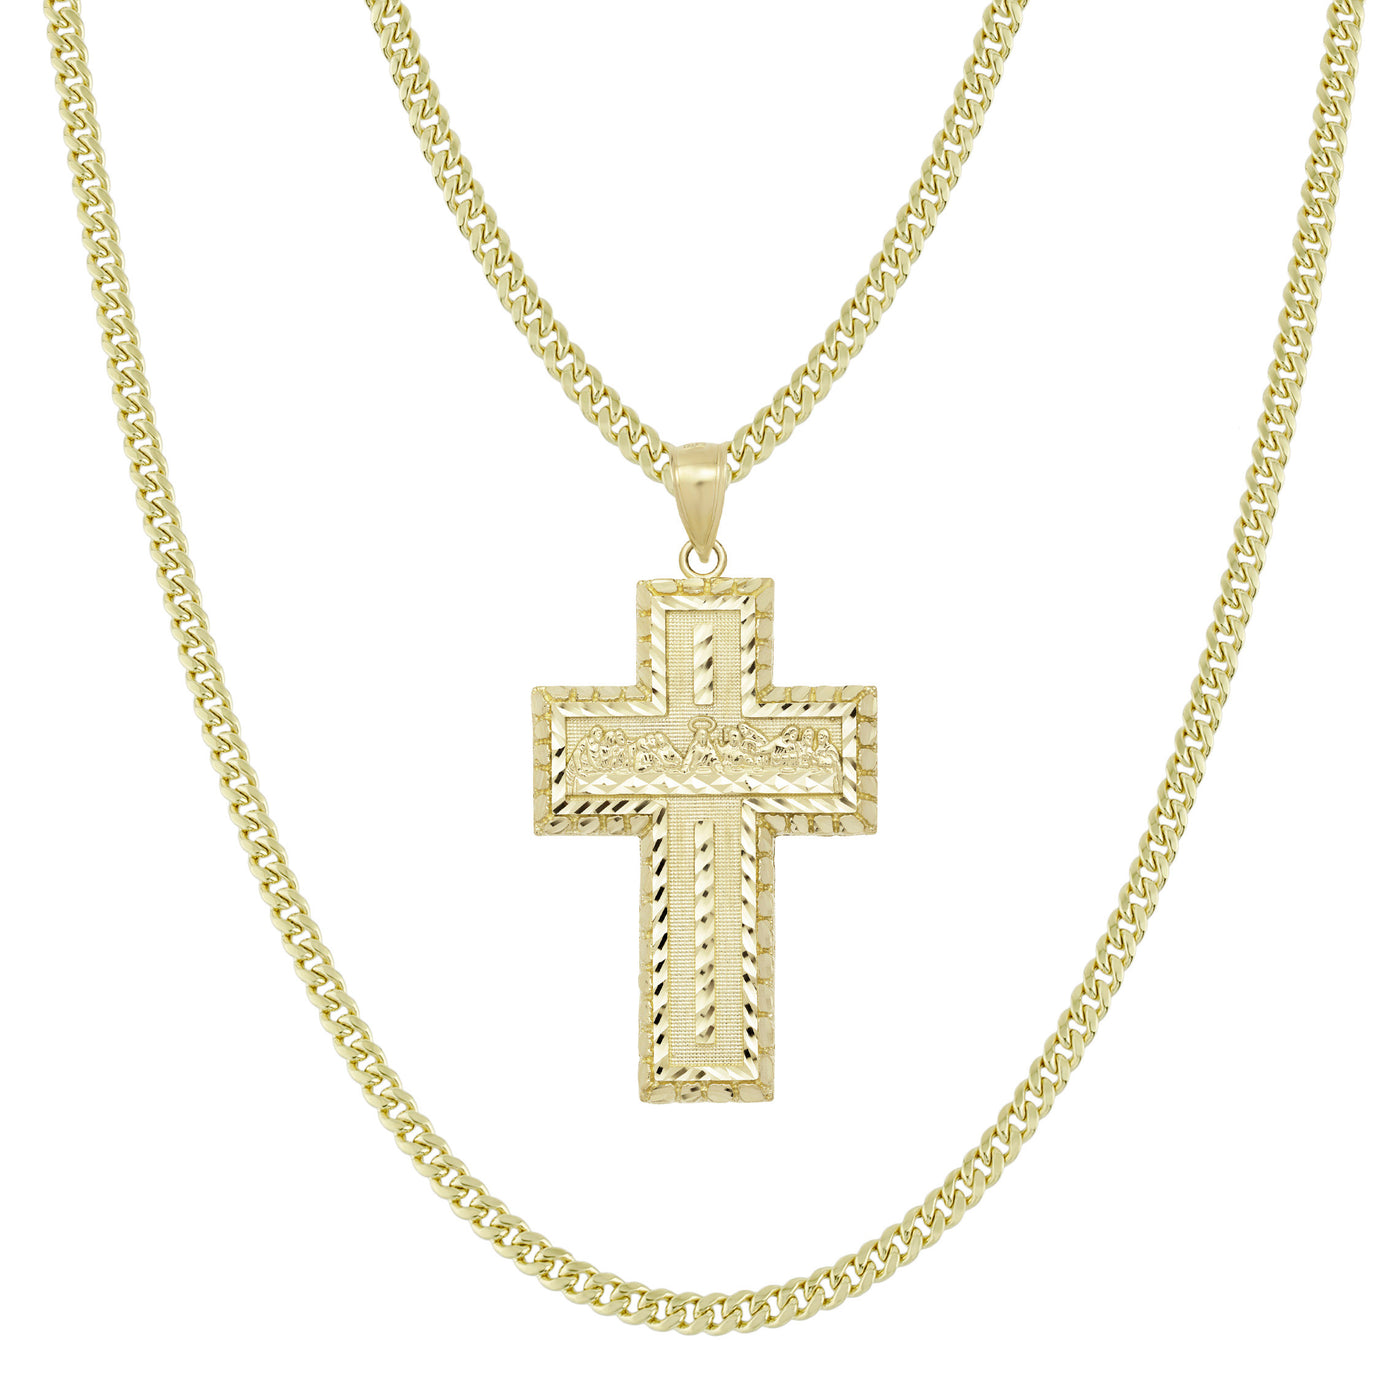 Last Supper Textured Cross Pendant & Chain Necklace Set 10K Yellow Gold